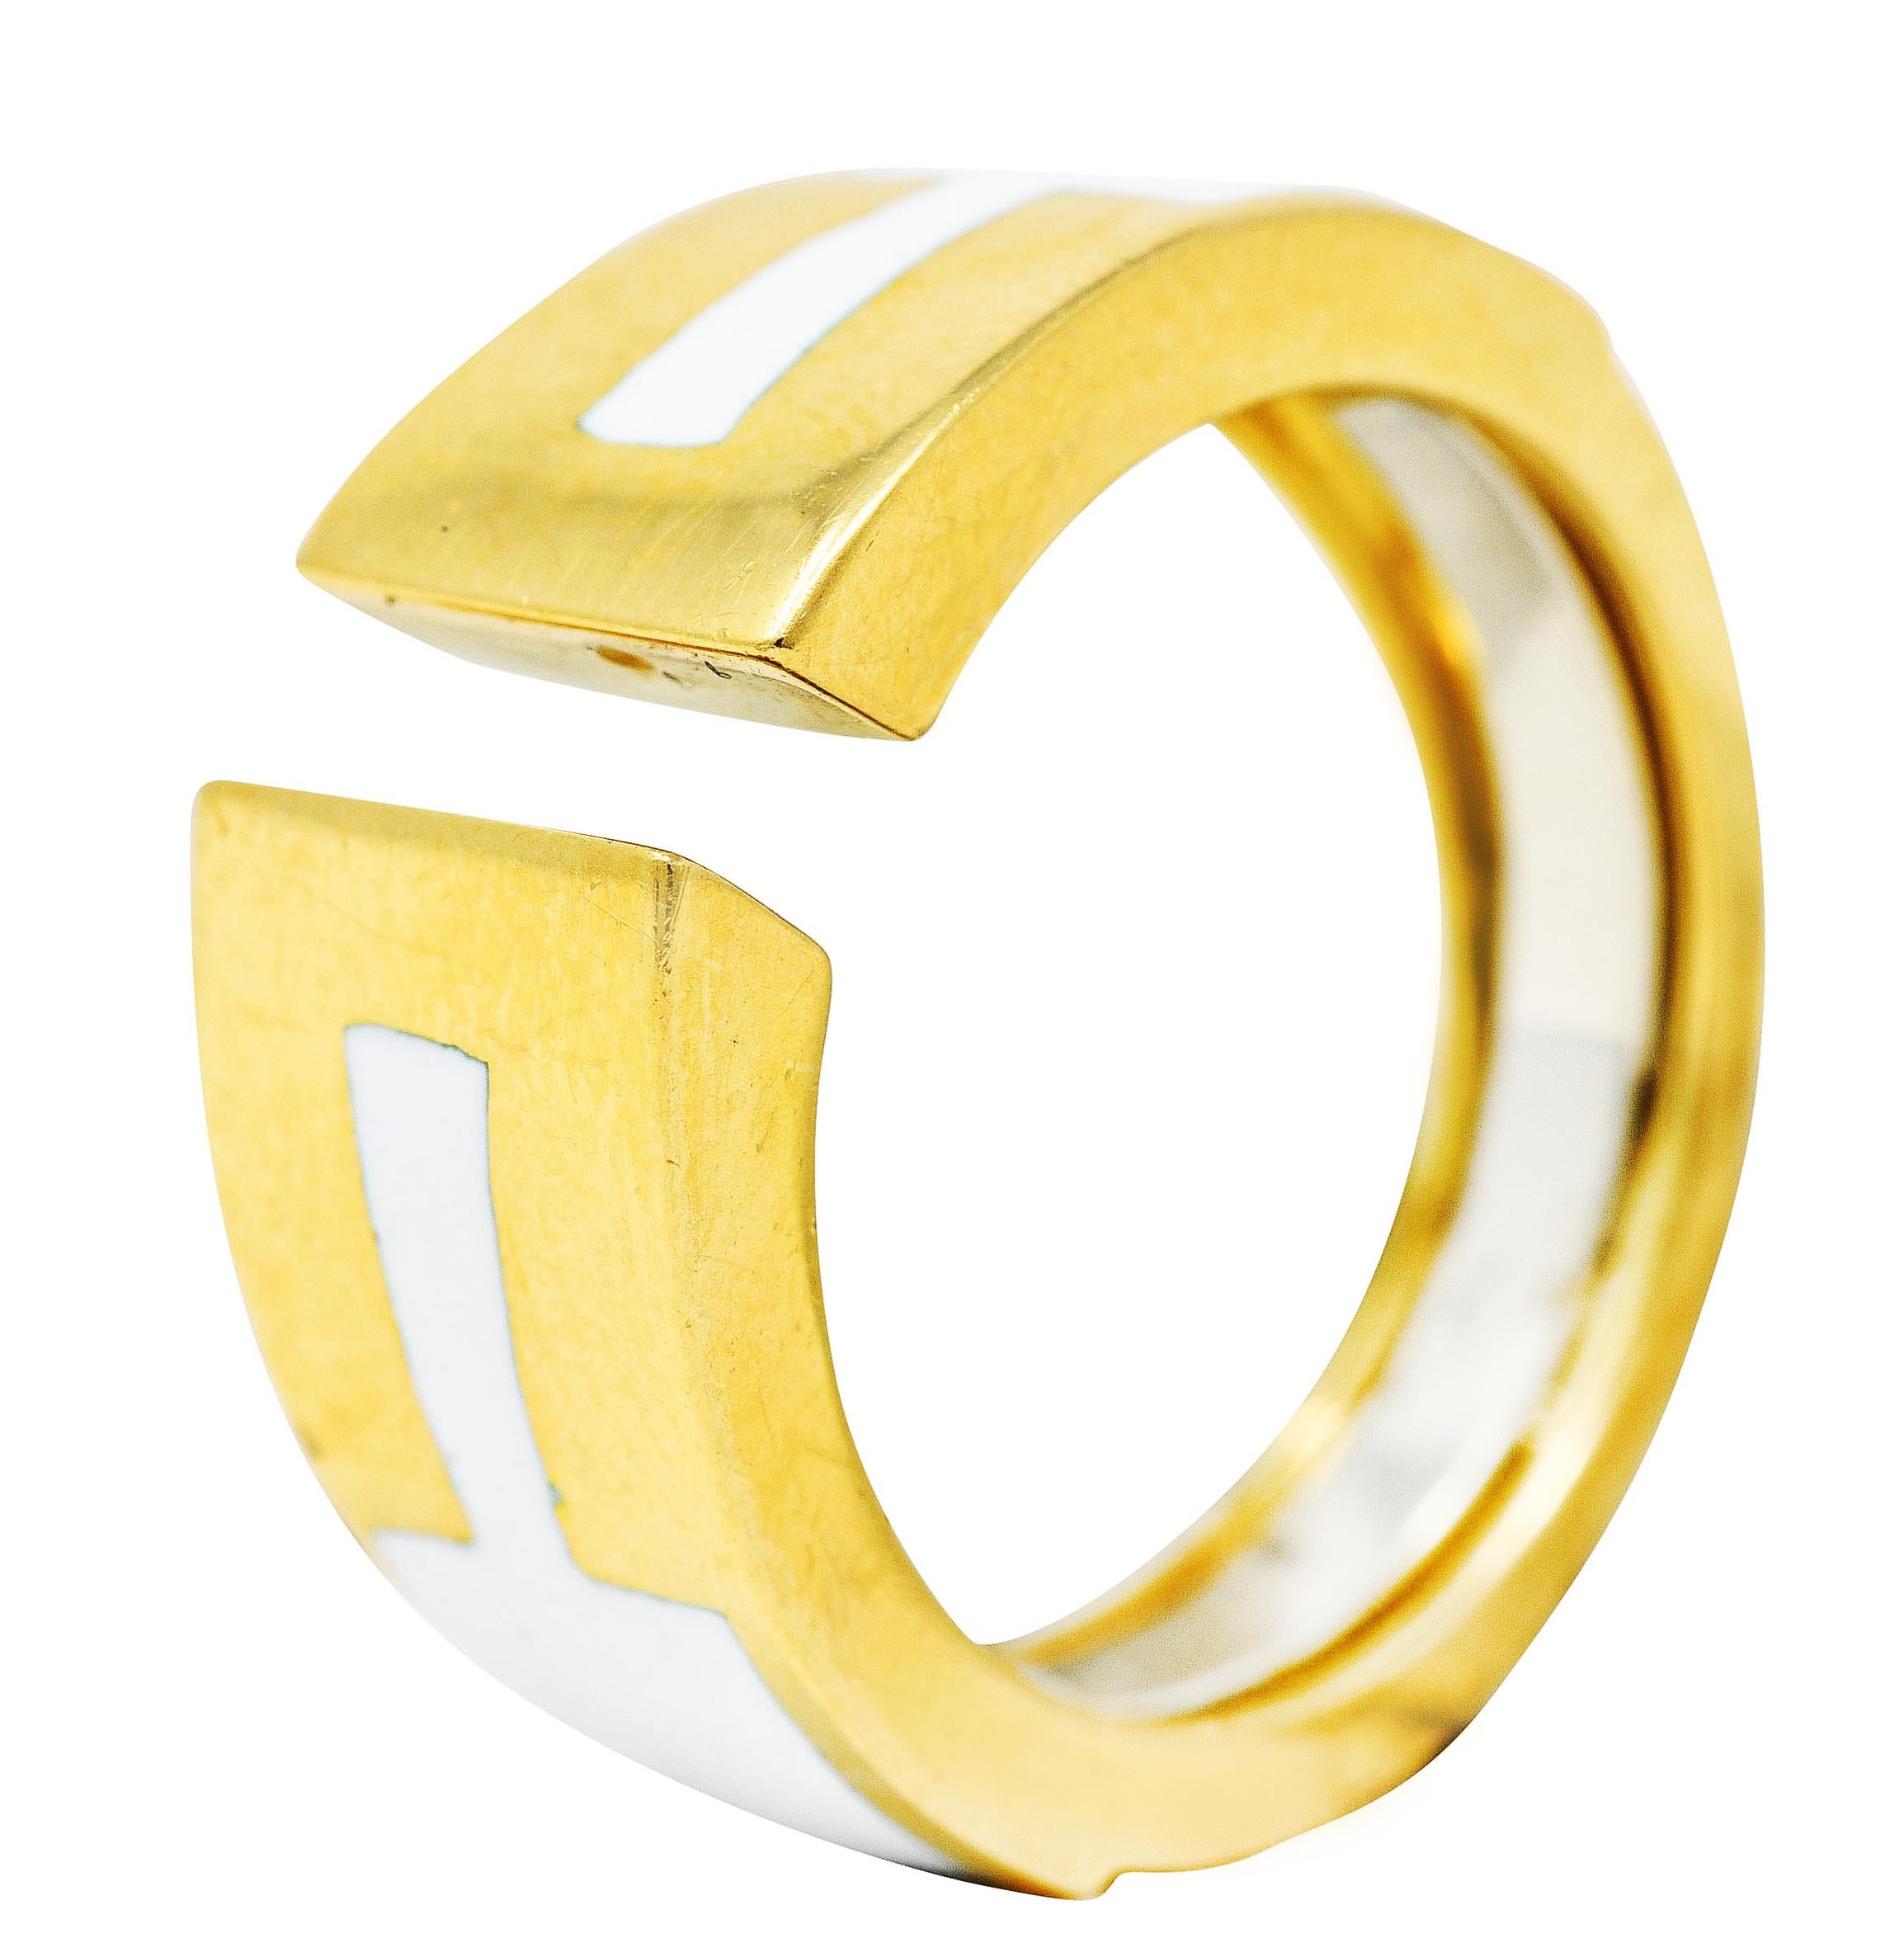 Band ring designed as highly polished gold centering a gap

Shoulders feature geometric panels of enamel

Intact high gloss and opaque white enamel

Stamped 18k for 18 karat gold

Signed Webb for David Webb

From the early Motif collection

Ring